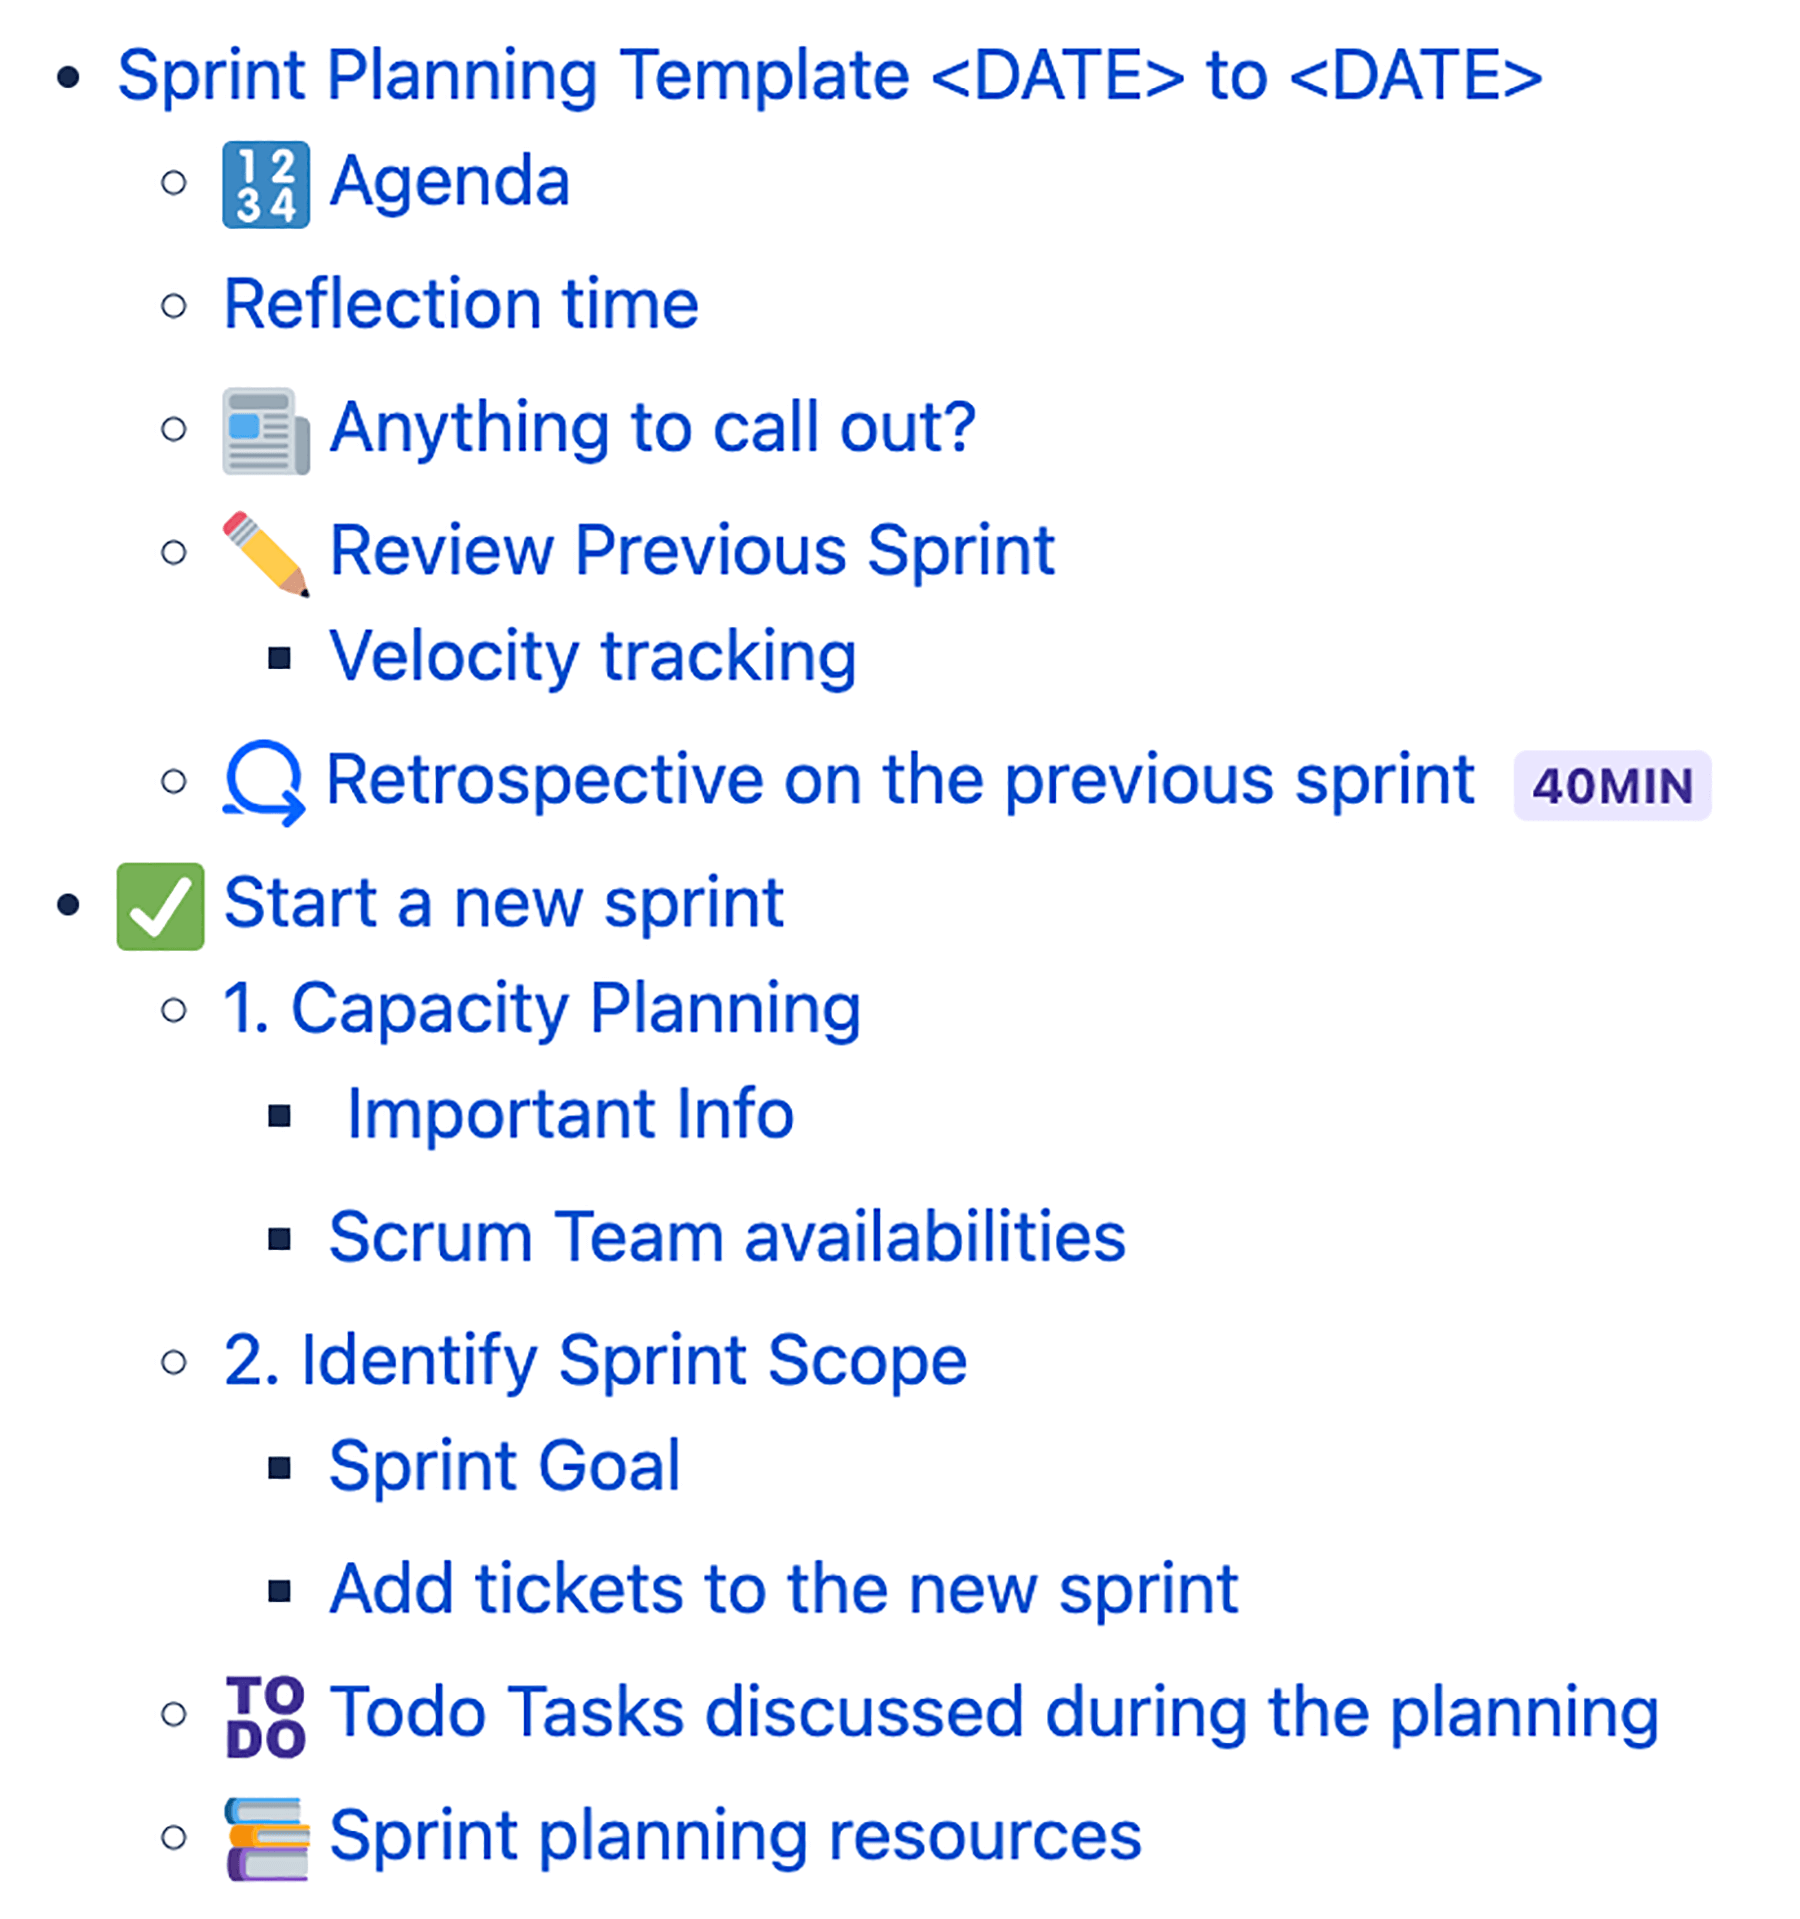 Sprint planning template image